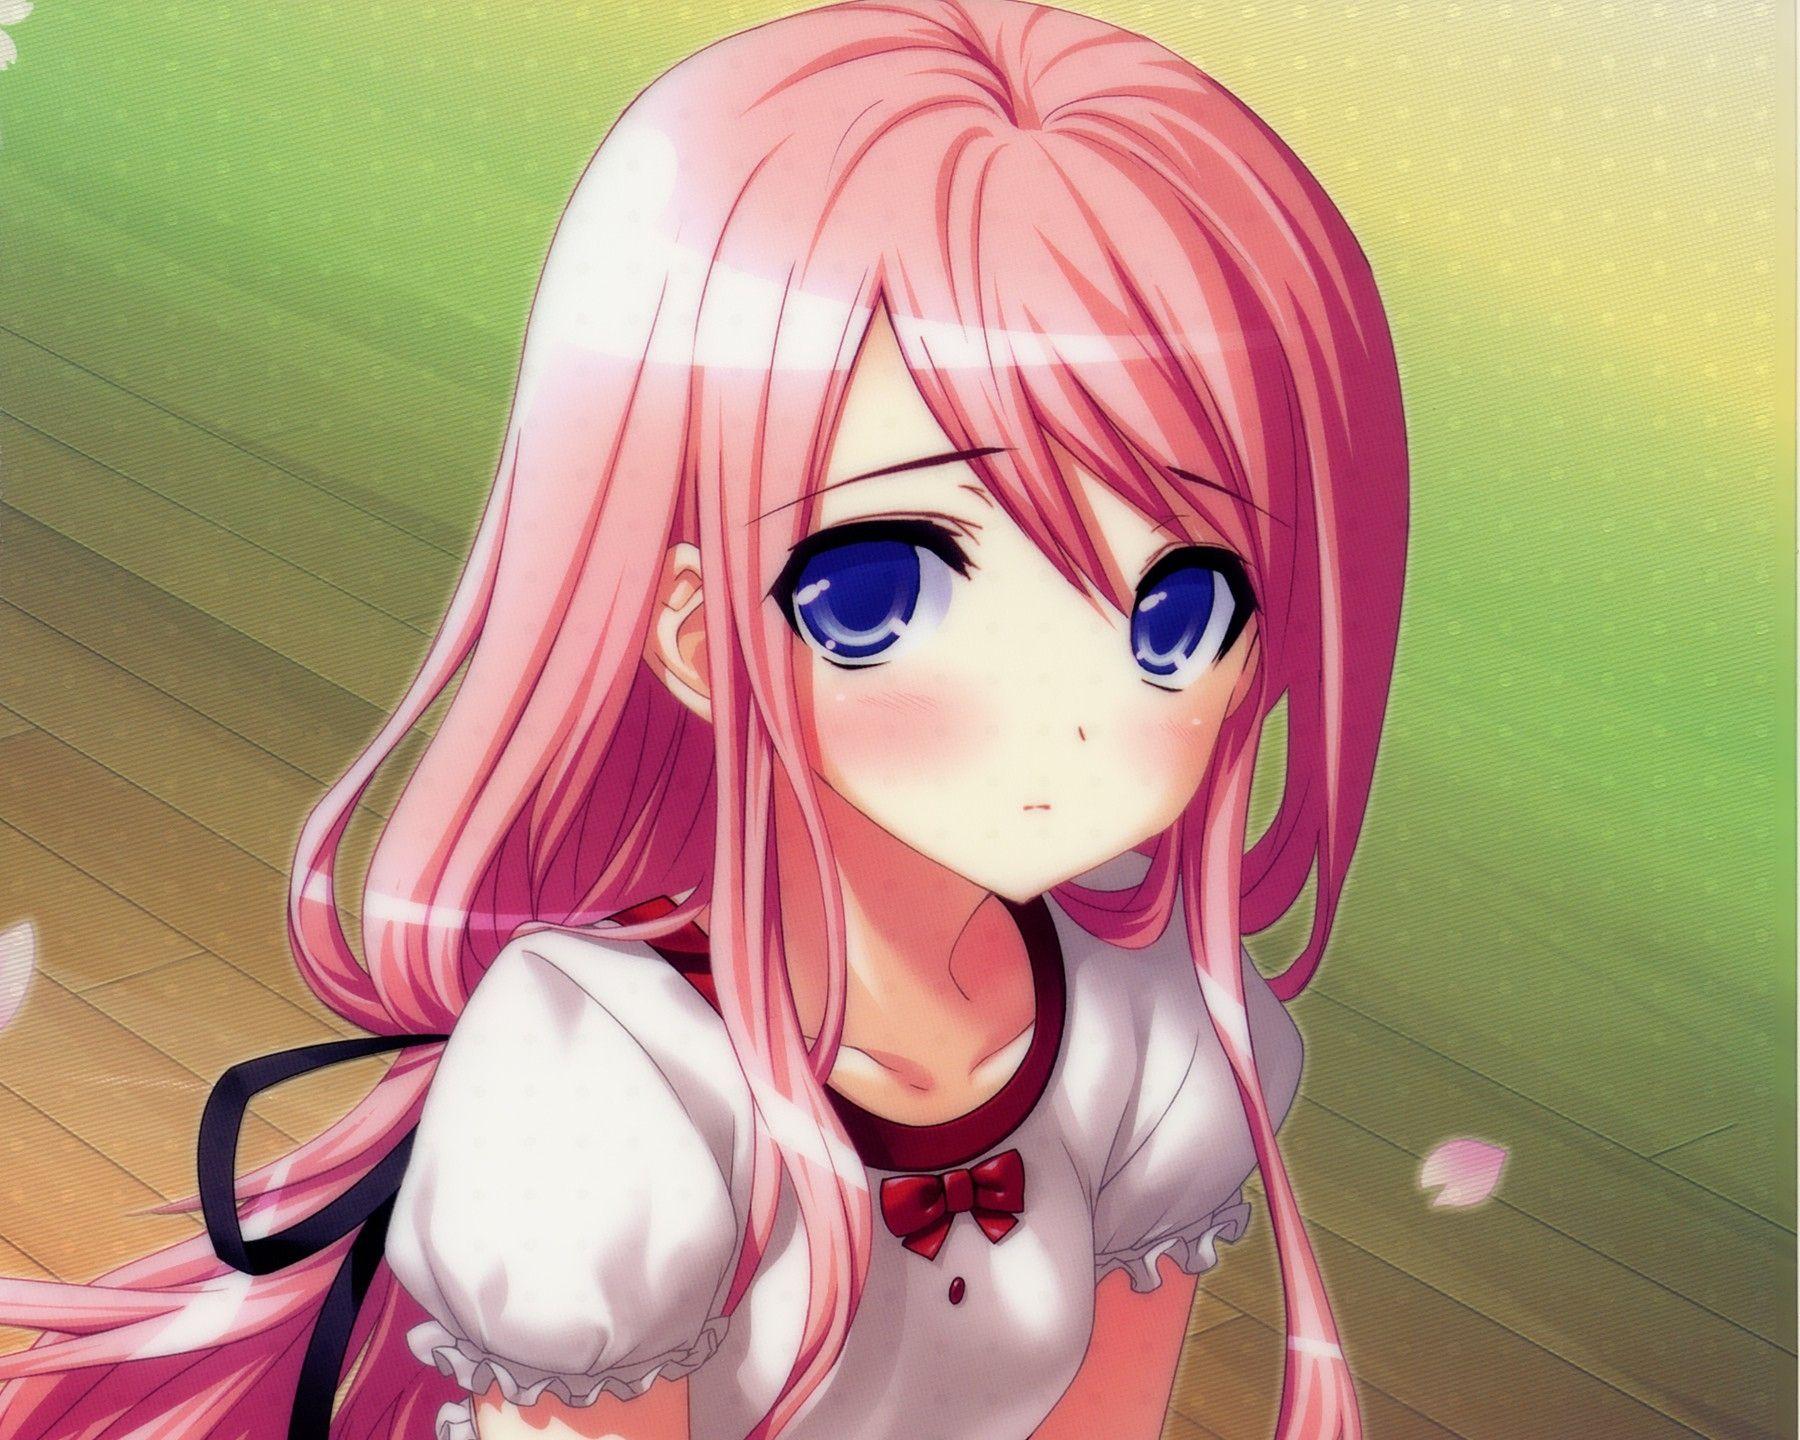 1. Pink-haired anime girl with blue eyes - wide 5